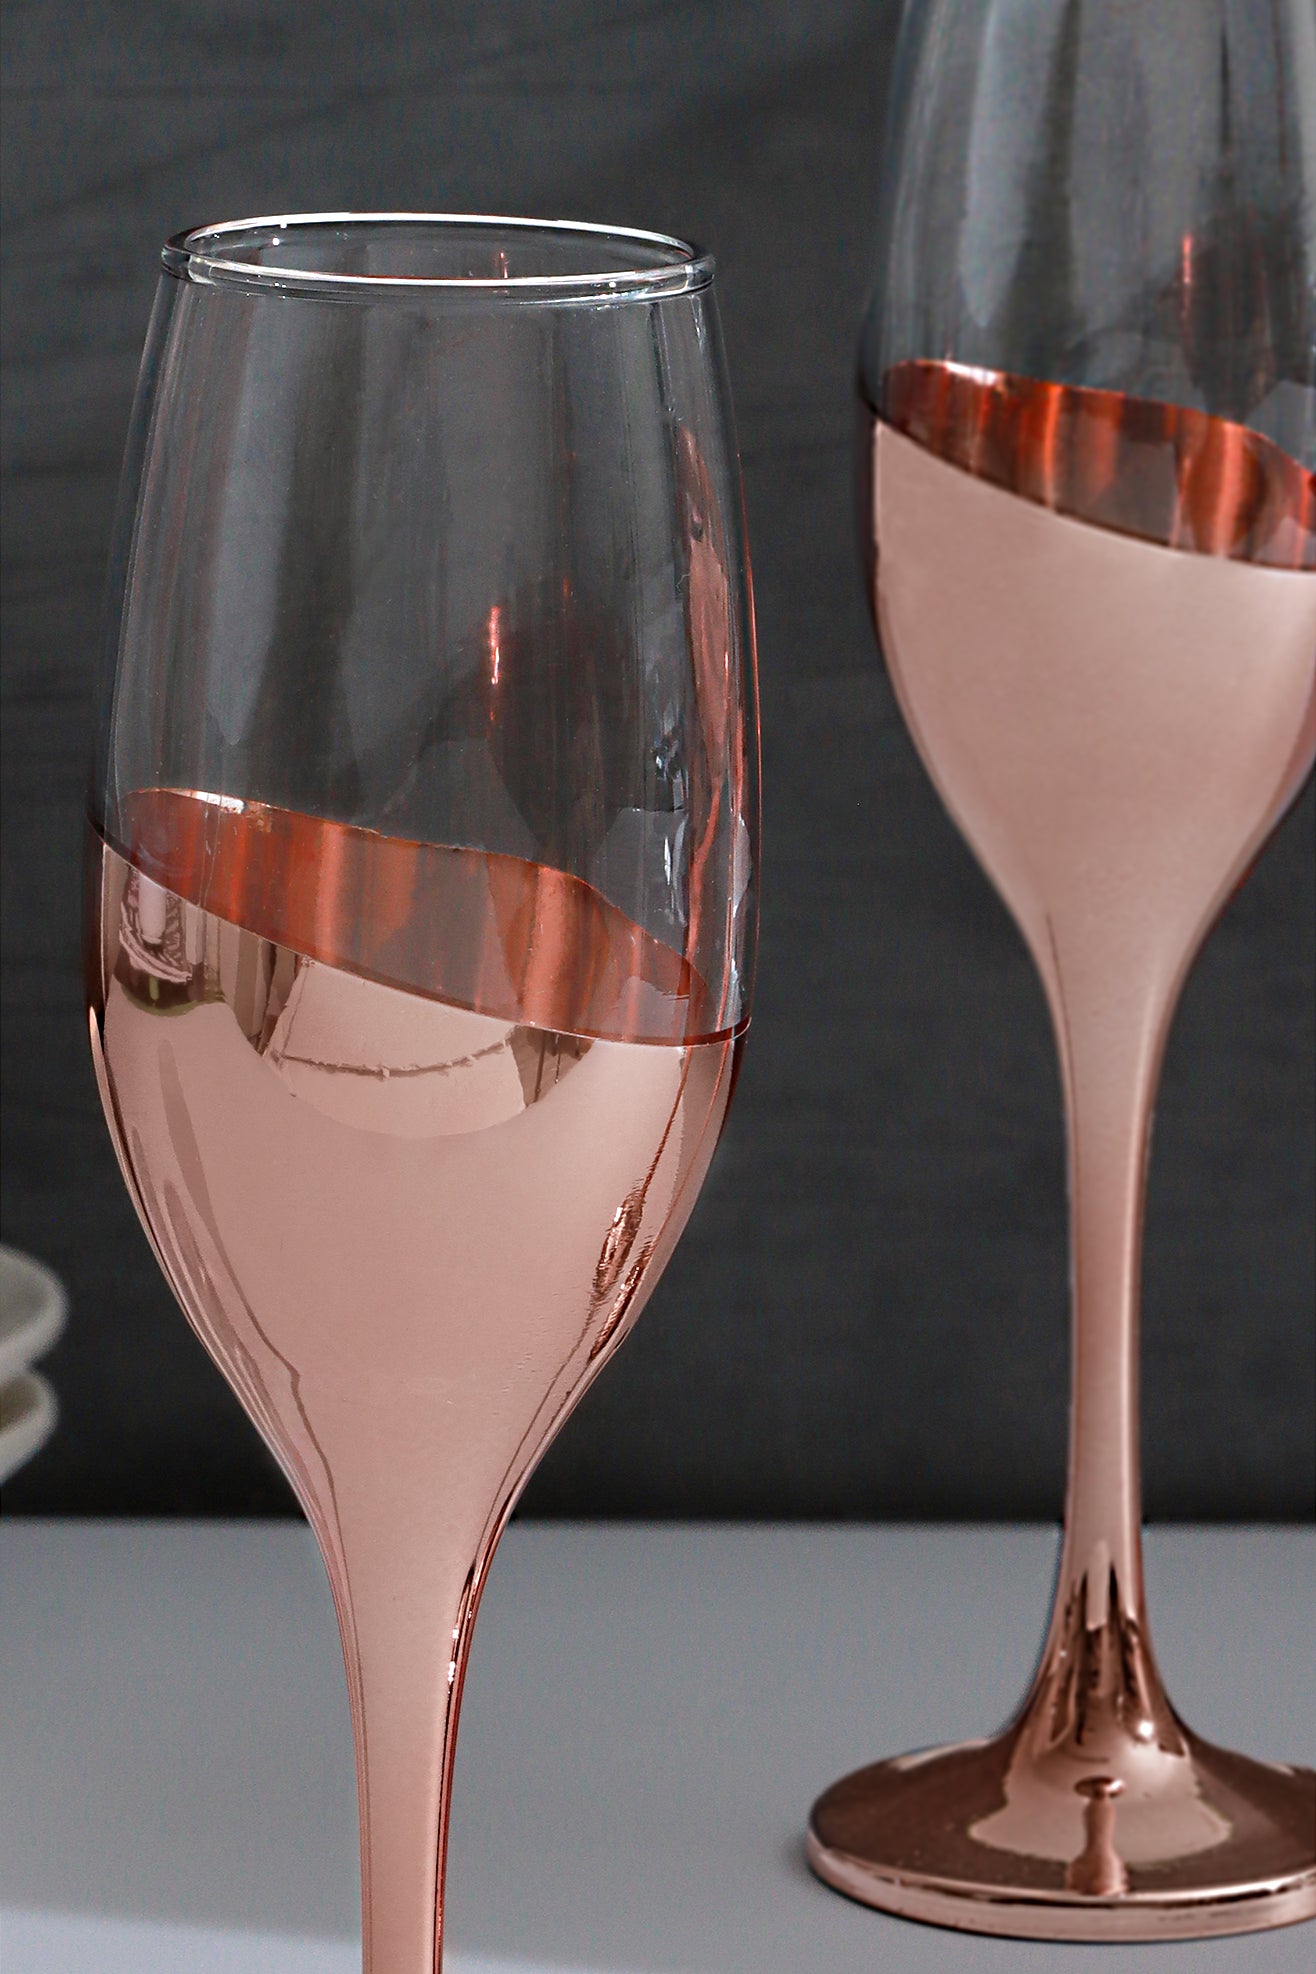 Set of Four Sephora Two-Tone Copper Plated Rose Gold Champagne Glasses, Stylish and Elegant Glassware for Parties and Entertaining